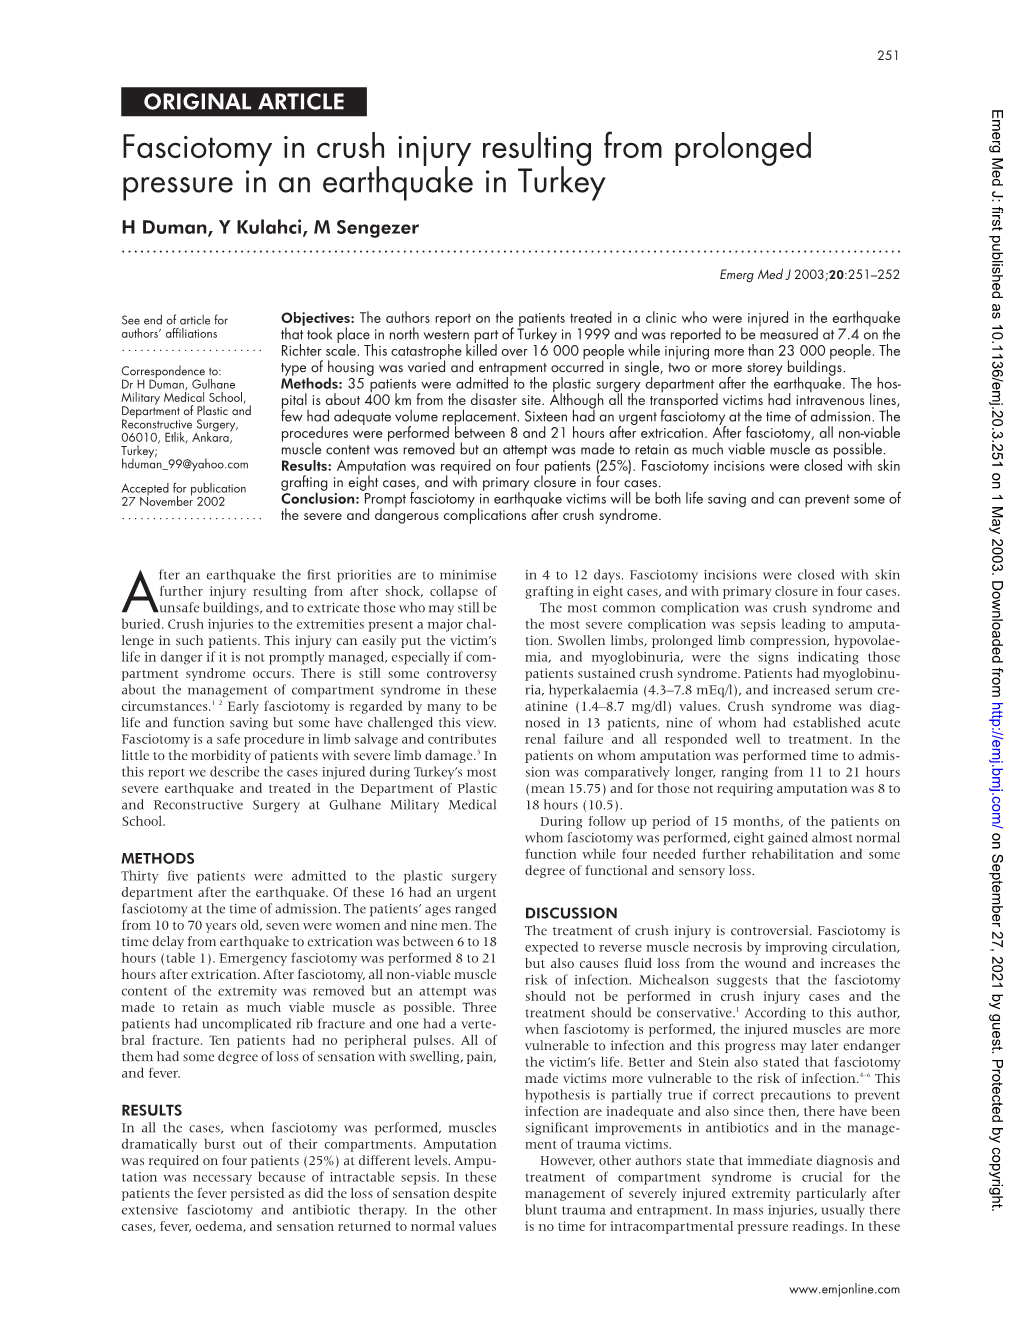 Fasciotomy in Crush Injury Resulting from Prolonged Pressure in an Earthquake in Turkey H Duman, Y Kulahci, M Sengezer